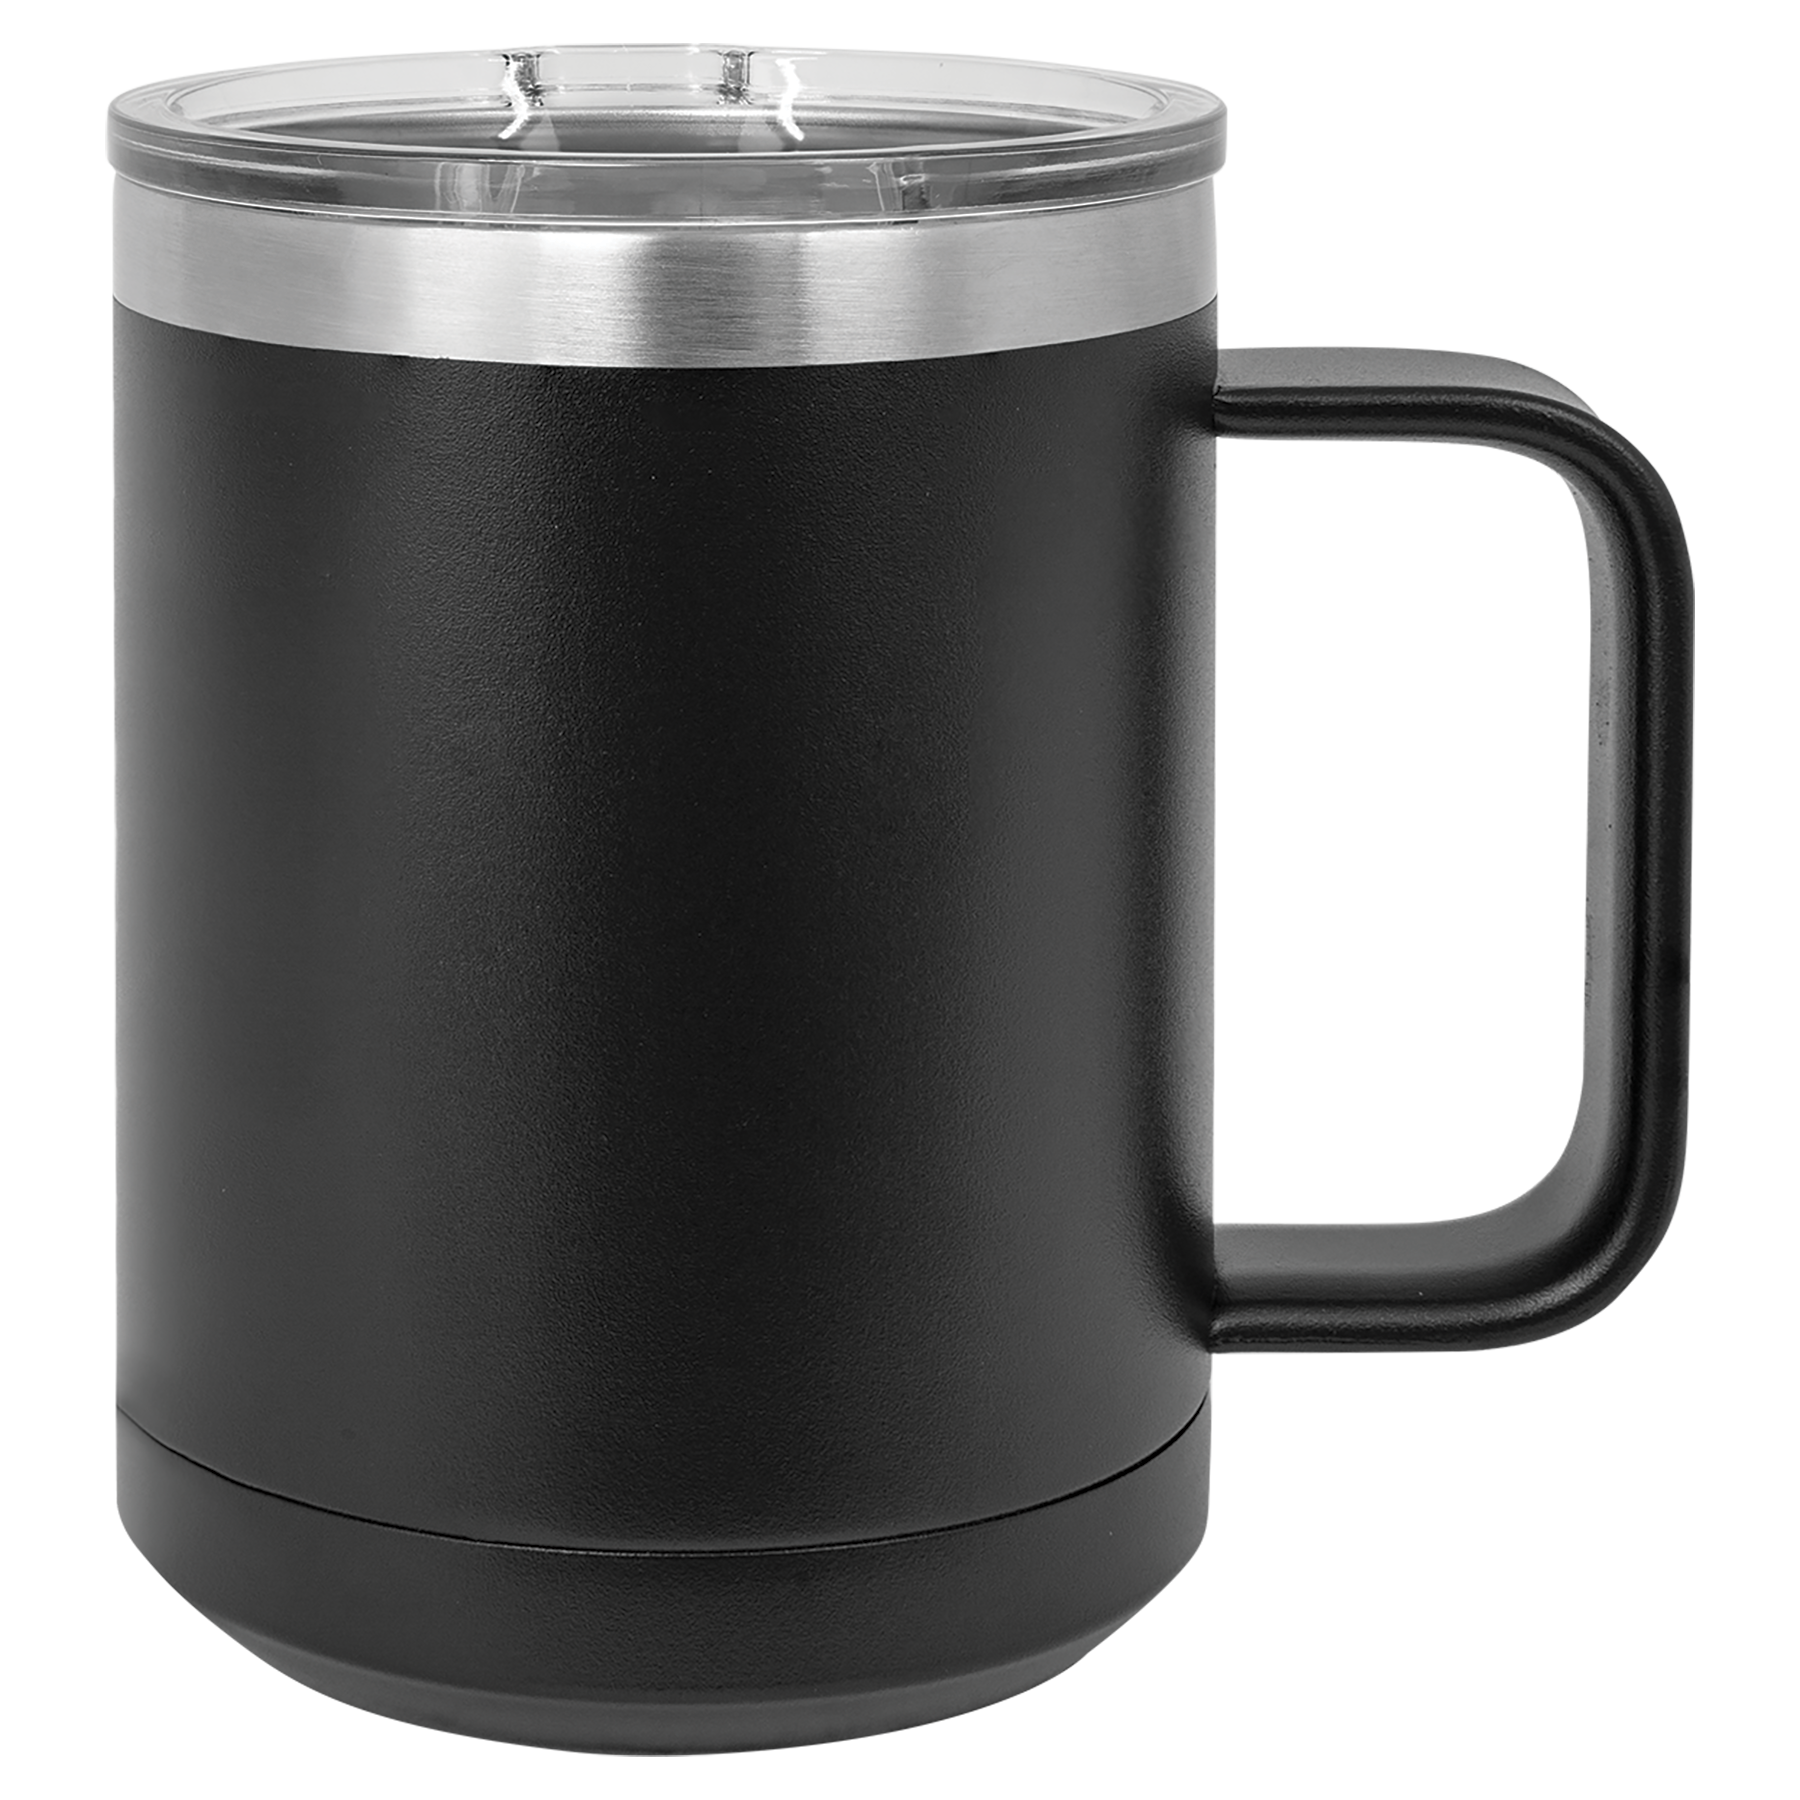 Black 15oz Coffee Mug -One Free Engraving  -Fits most Cup Holders  -Double-wall Vacuum Insulated  -Made from 18/8 Gauge Stainless Steel (Type 304 Food Grade)  -Lid is BPA Free (Hand Wash Only)  -Not recommended for Dishwasher  -Works with Cold and Hot Drinks  -18 Color Options  -Perfect for Personalized Gifts, Awards, Incentives, Swag & Fundraisers